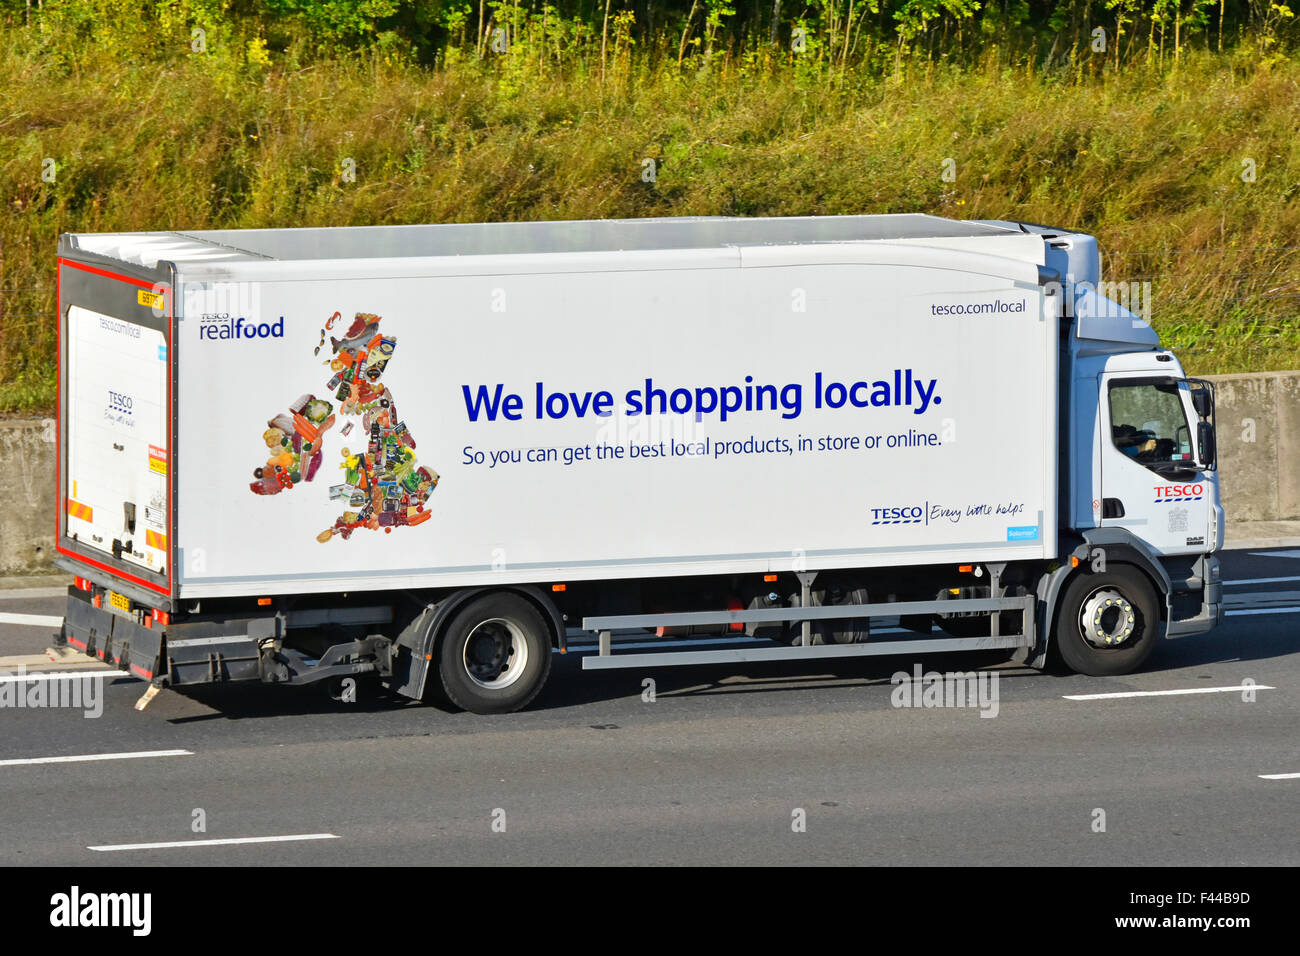 Tesco supply chain lorry used for smaller local supermarket store delivery with uk map & advertising driving along English motorway Stock Photo